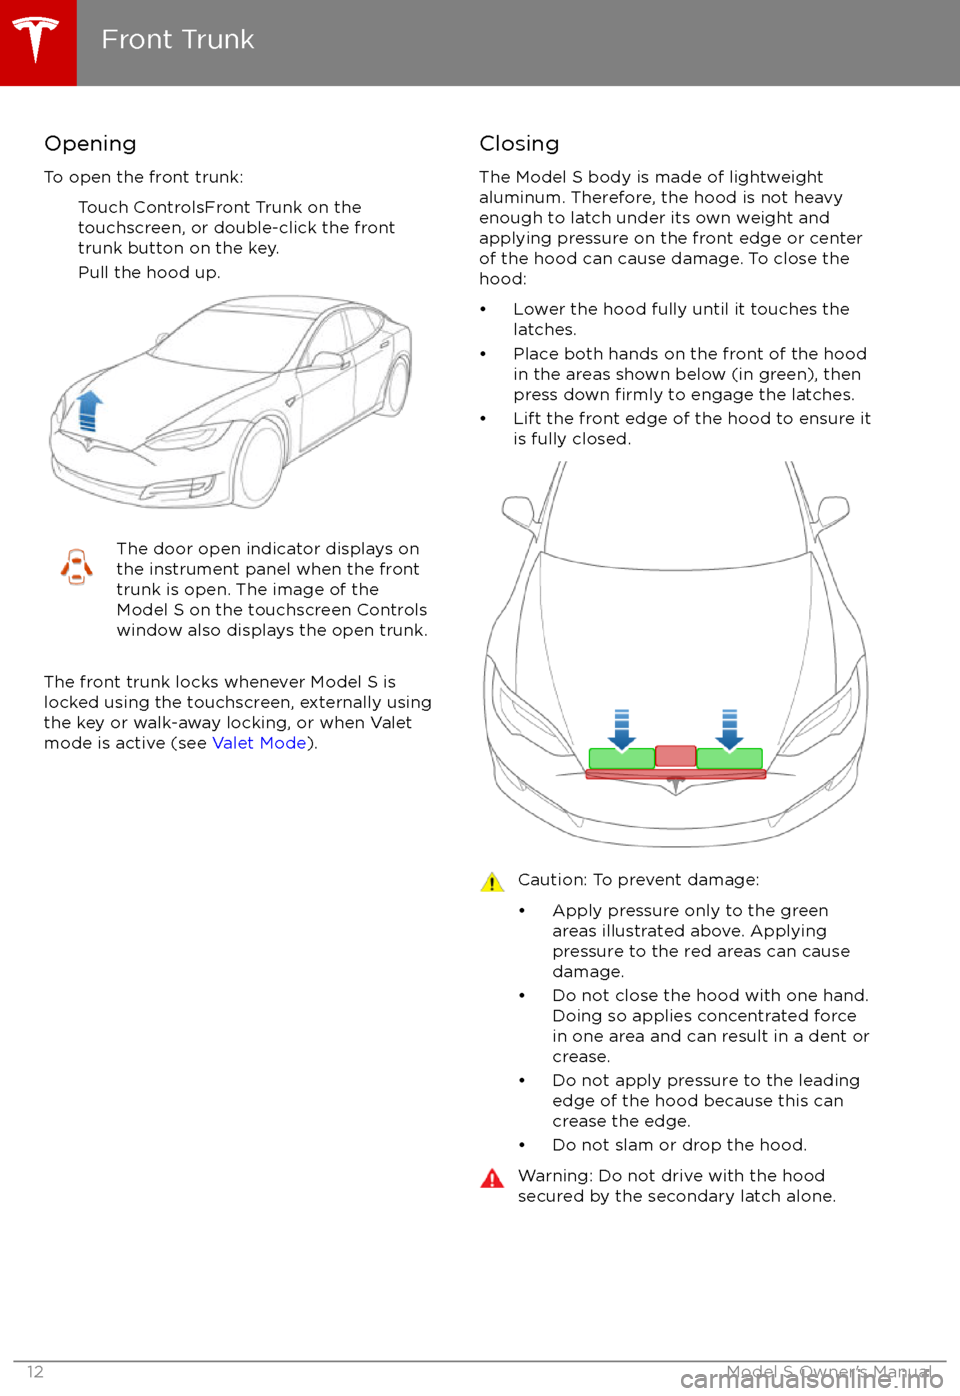 TESLA MODEL S 2017  Owners Manual Opening
To open the front trunk: Touch ControlsFront Trunk on the
touchscreen, or double-click the front
trunk button on the key.
Pull the hood up.The door open indicator displays on
the instrument pa